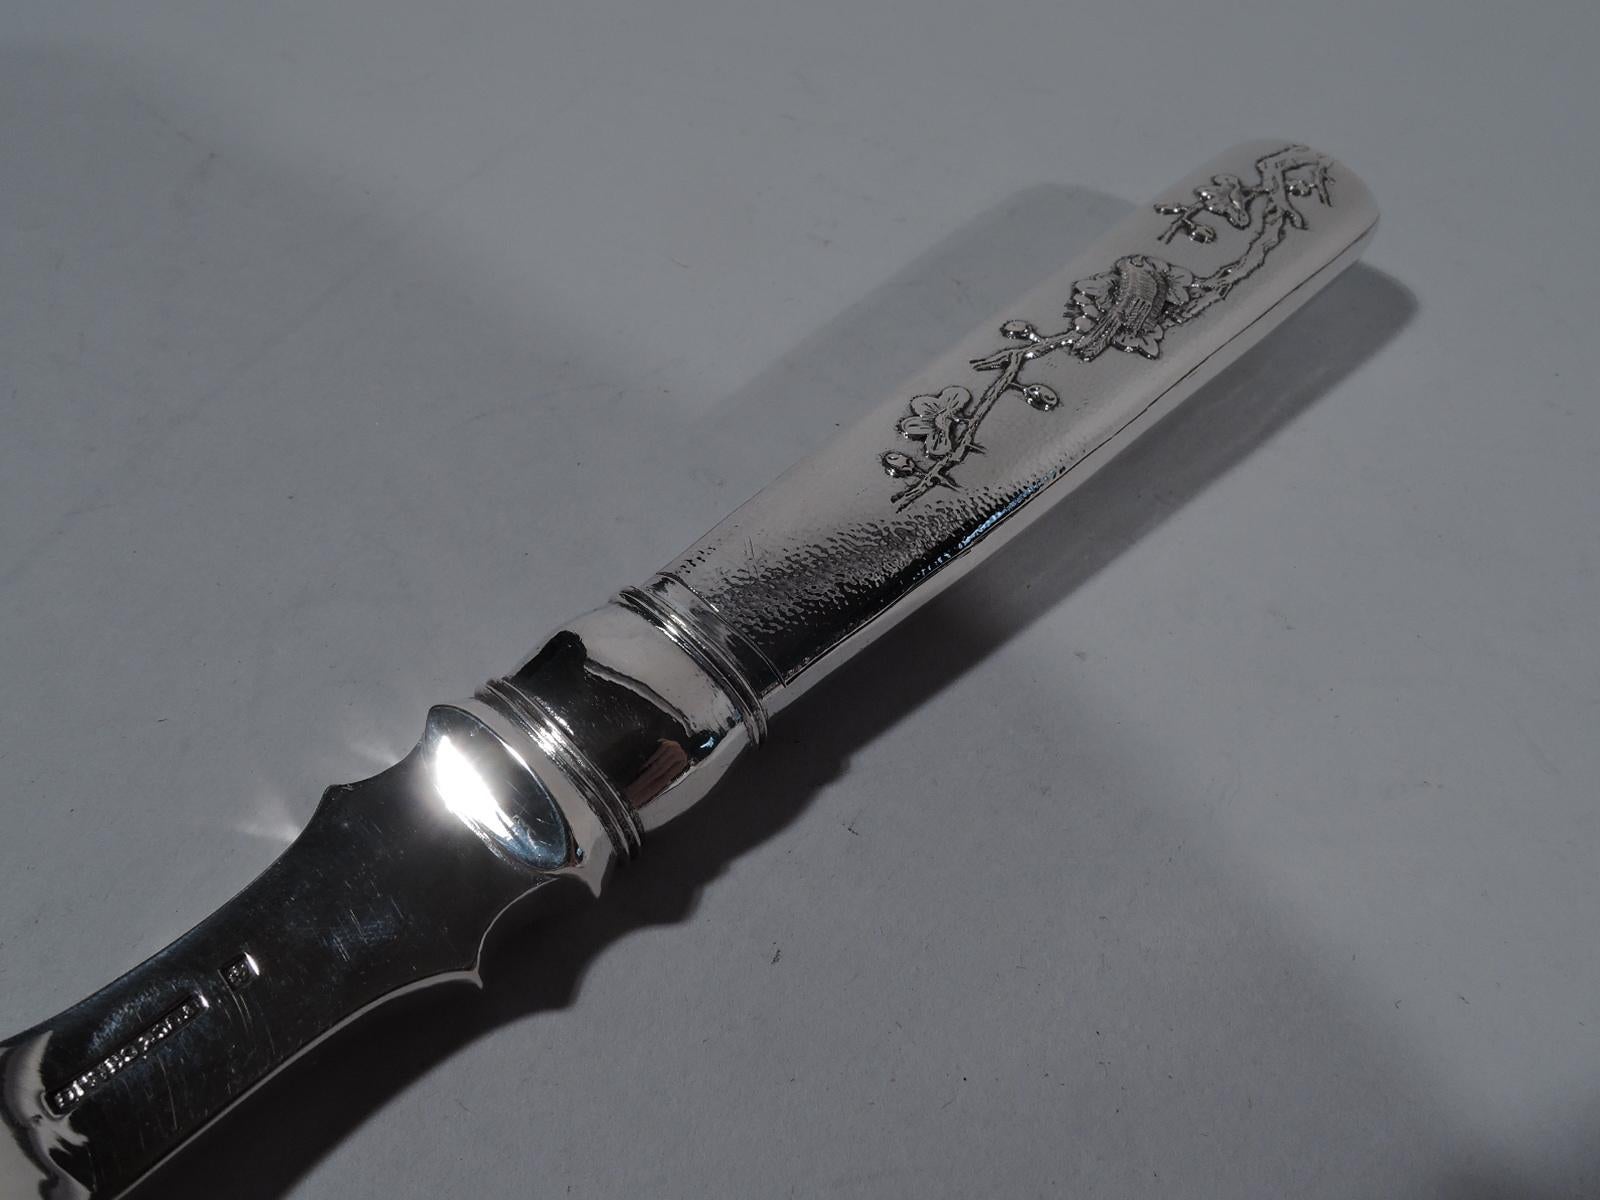 Turn-of-the-century Chinese export silver serving fork. Retailed by Tuck Chang in Shanghai. Scalloped 4-tine shank engraved with fish and grass. Handle tapering and hollow. Double-sided ornament with birds perched on blossoming prunus branches.